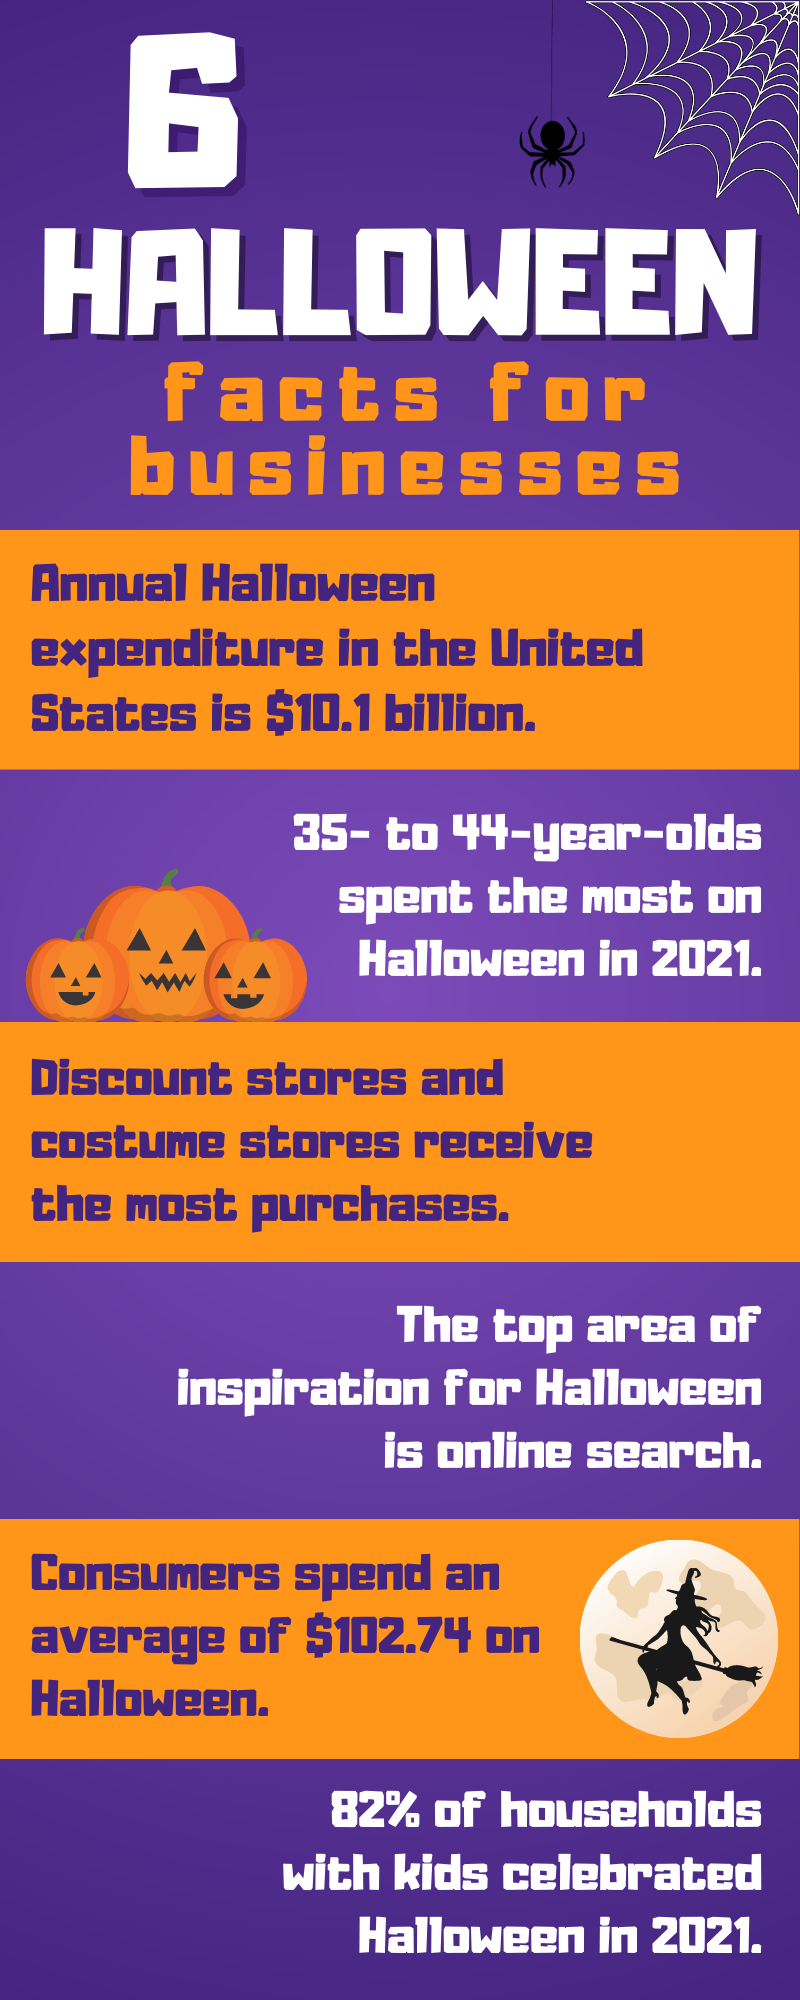 6 Halloween Facts for Businesses